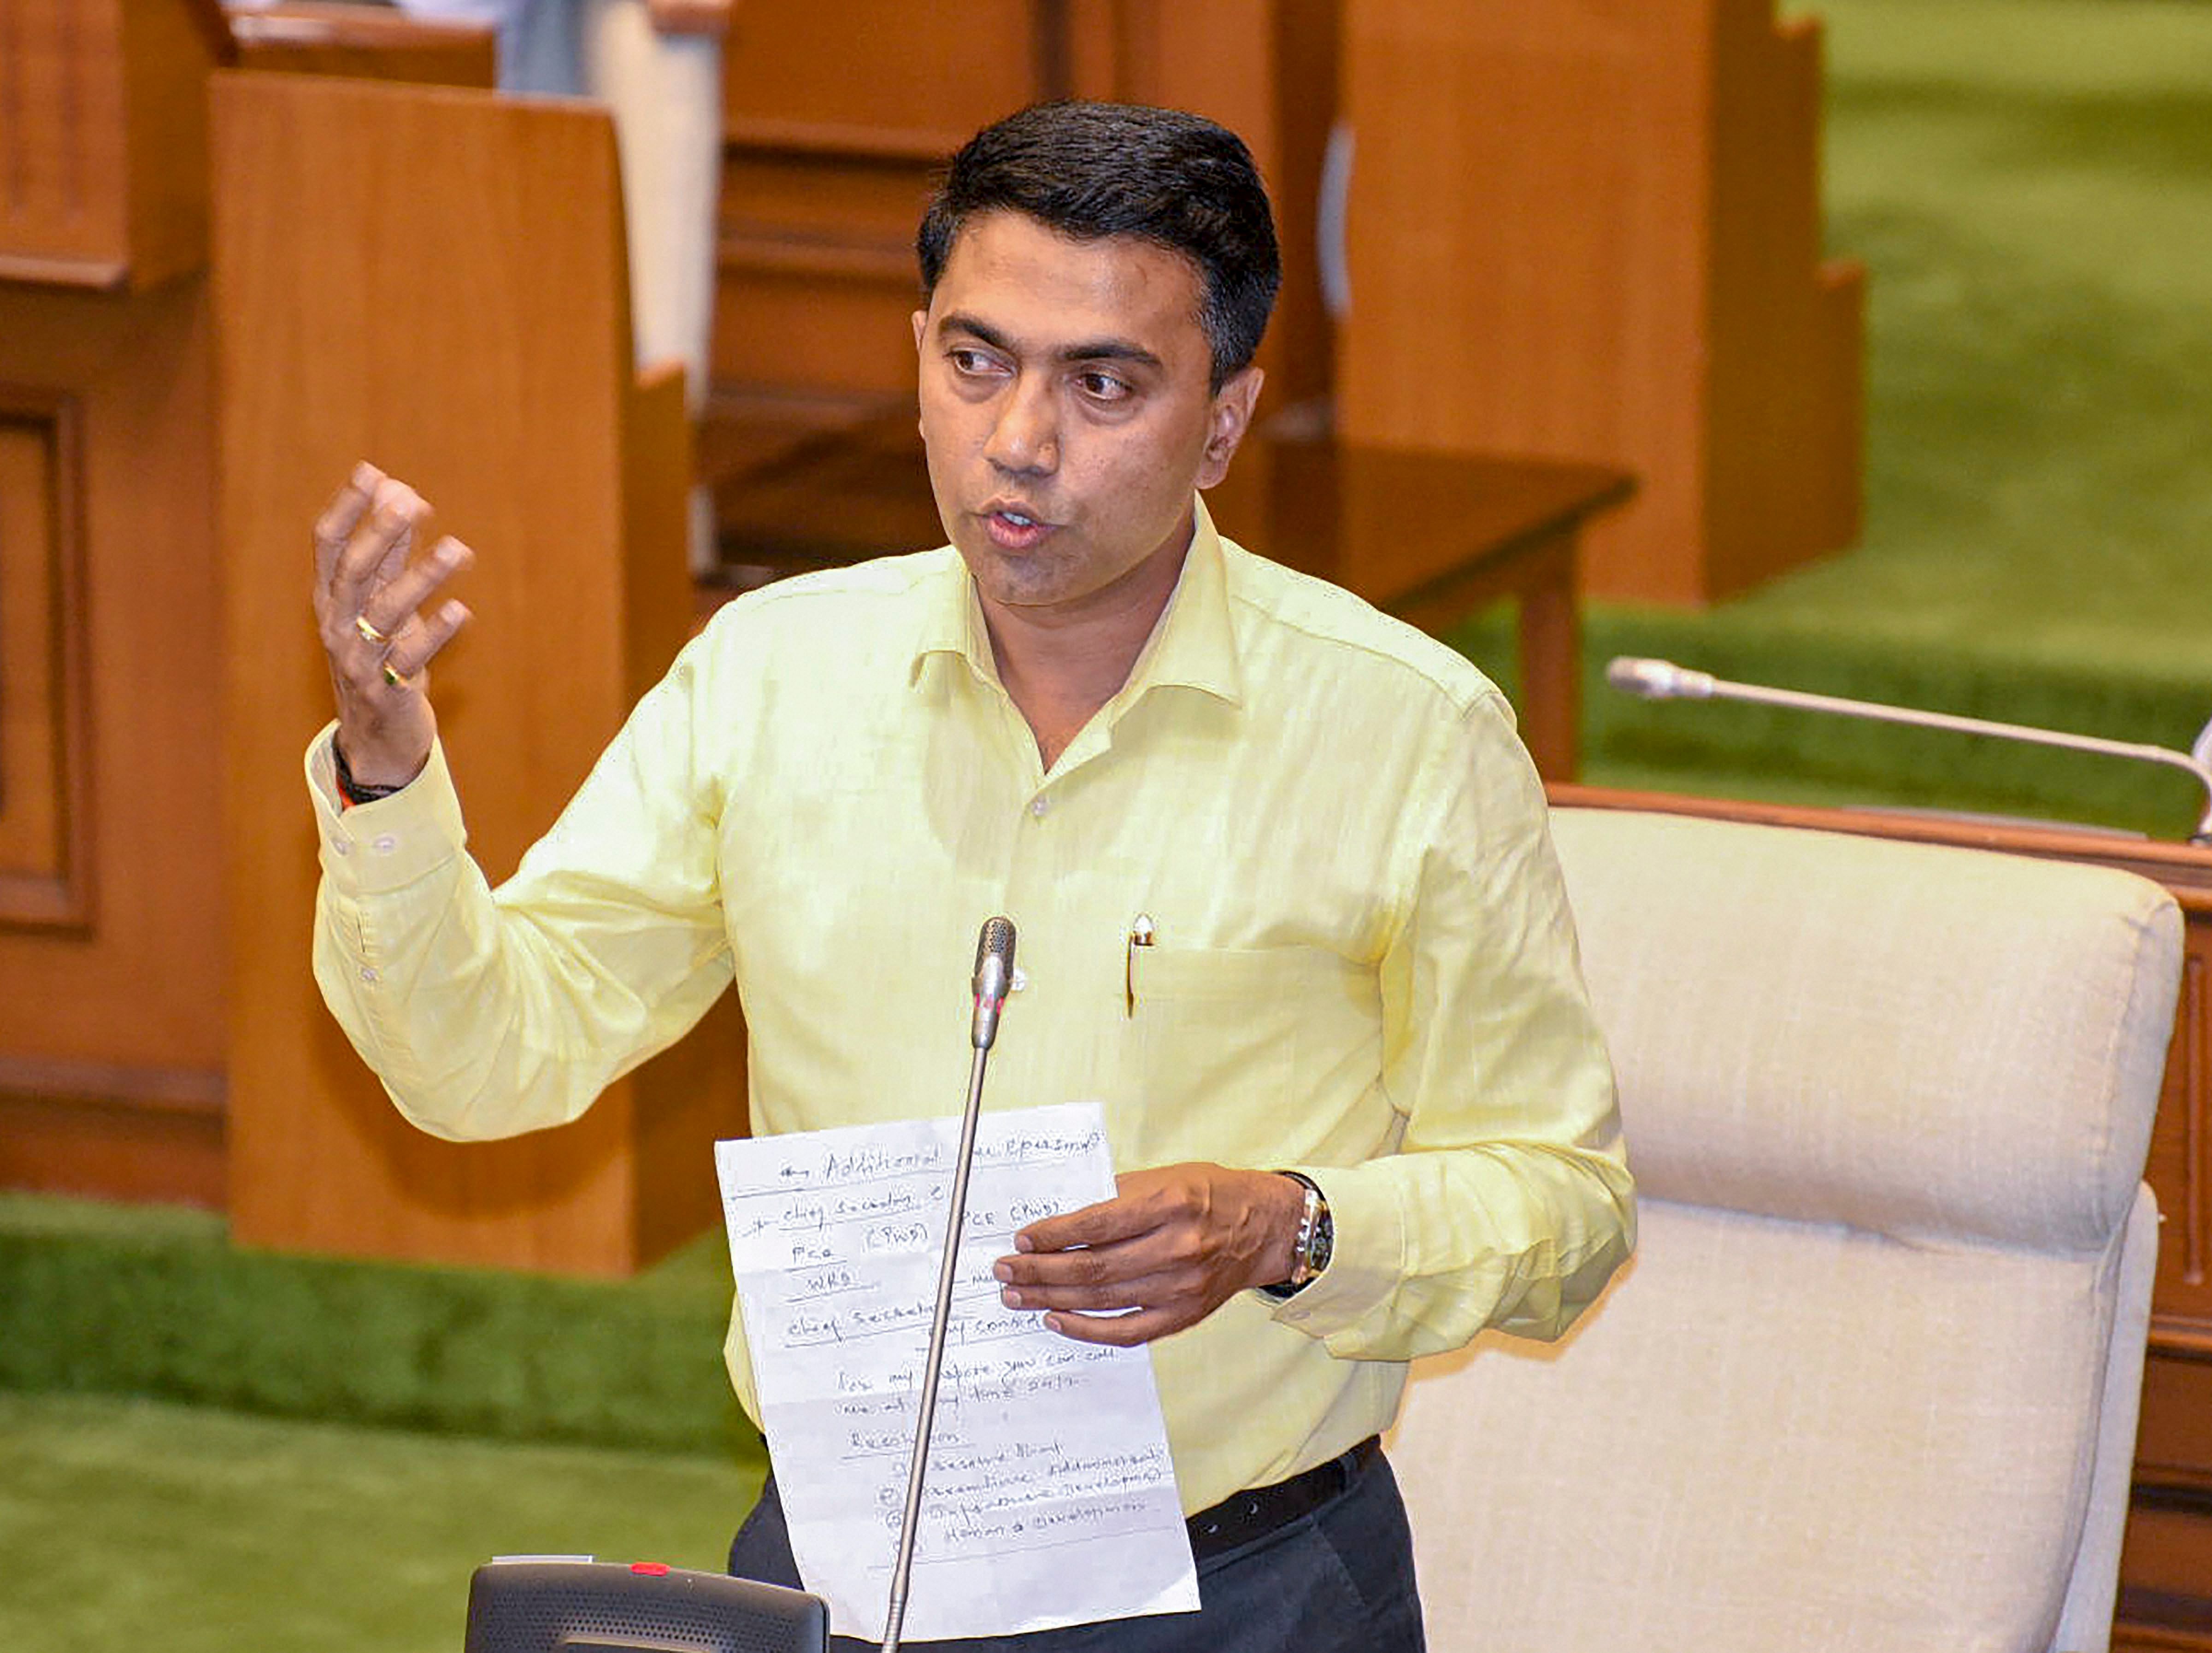 Goa Chief Minister Pramod Sawant delivers a speech during a confidence motion held at a special session in Goa State Legislative Assembly, in Panaji, Wednesday, March 20, 2019. (Credit: PTI Photo)